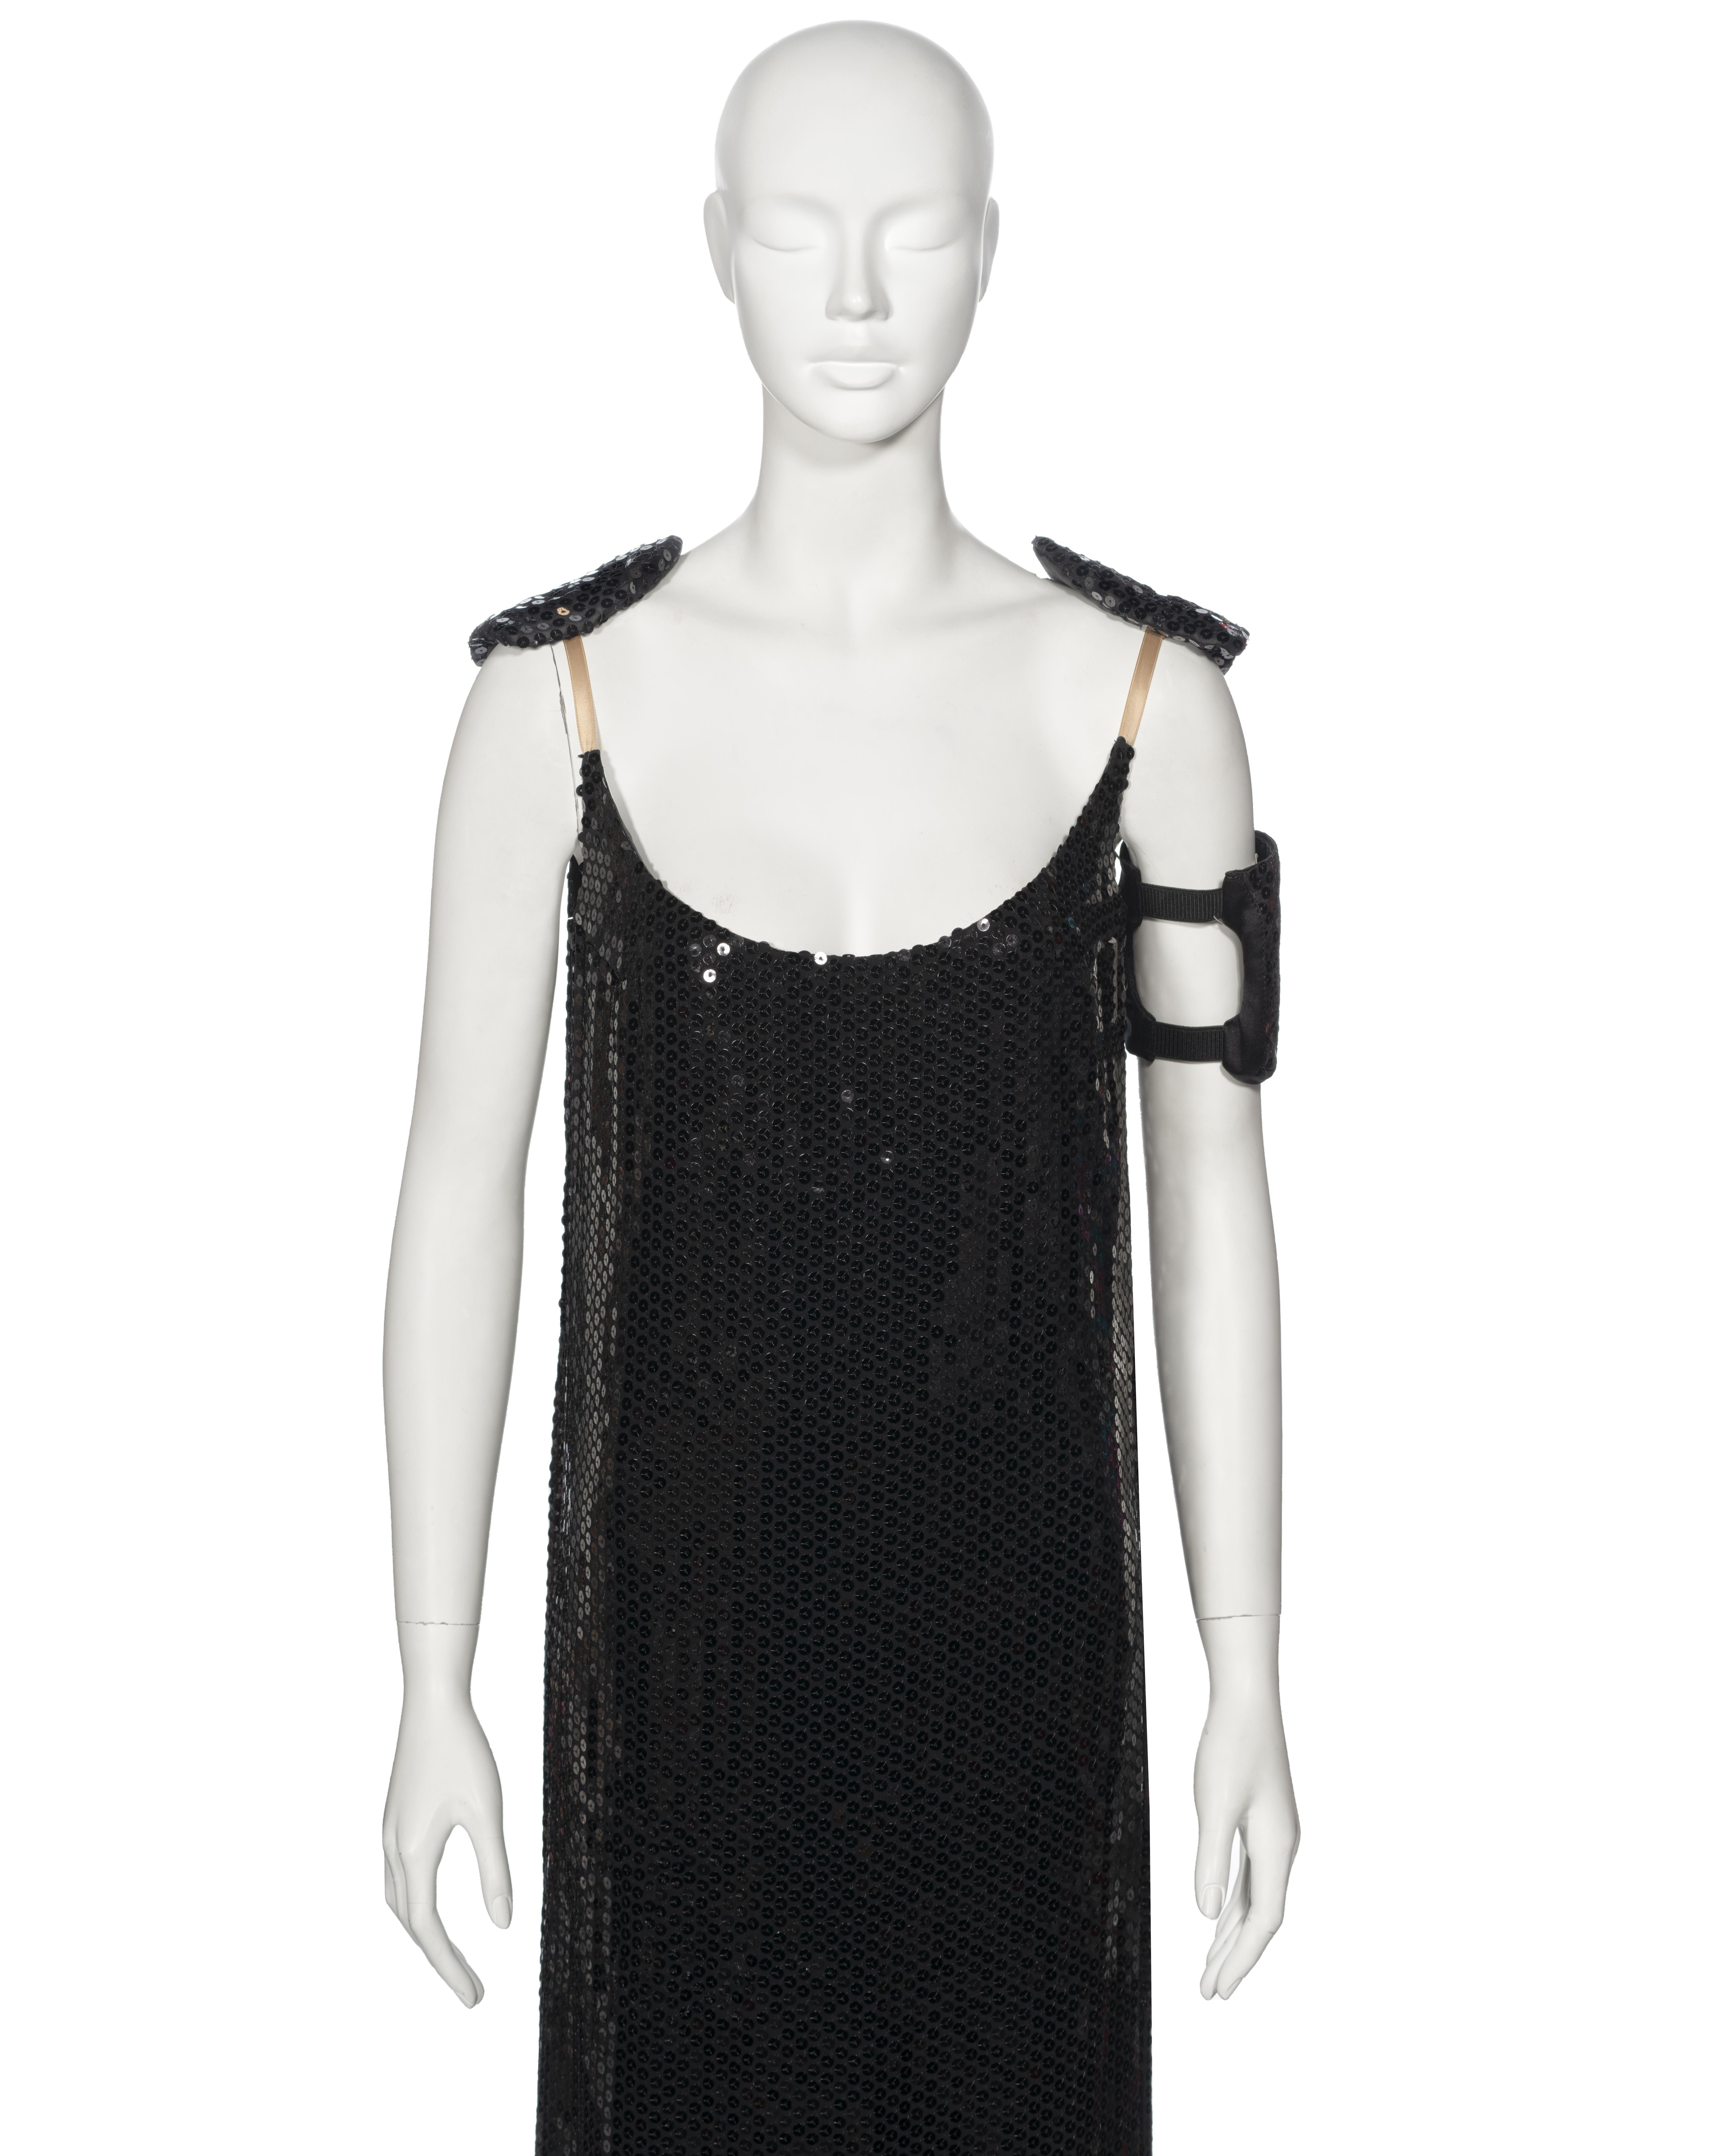 Helmut Lang Black Sequin Evening Dress With Armband, fw 1999 In Excellent Condition For Sale In London, GB